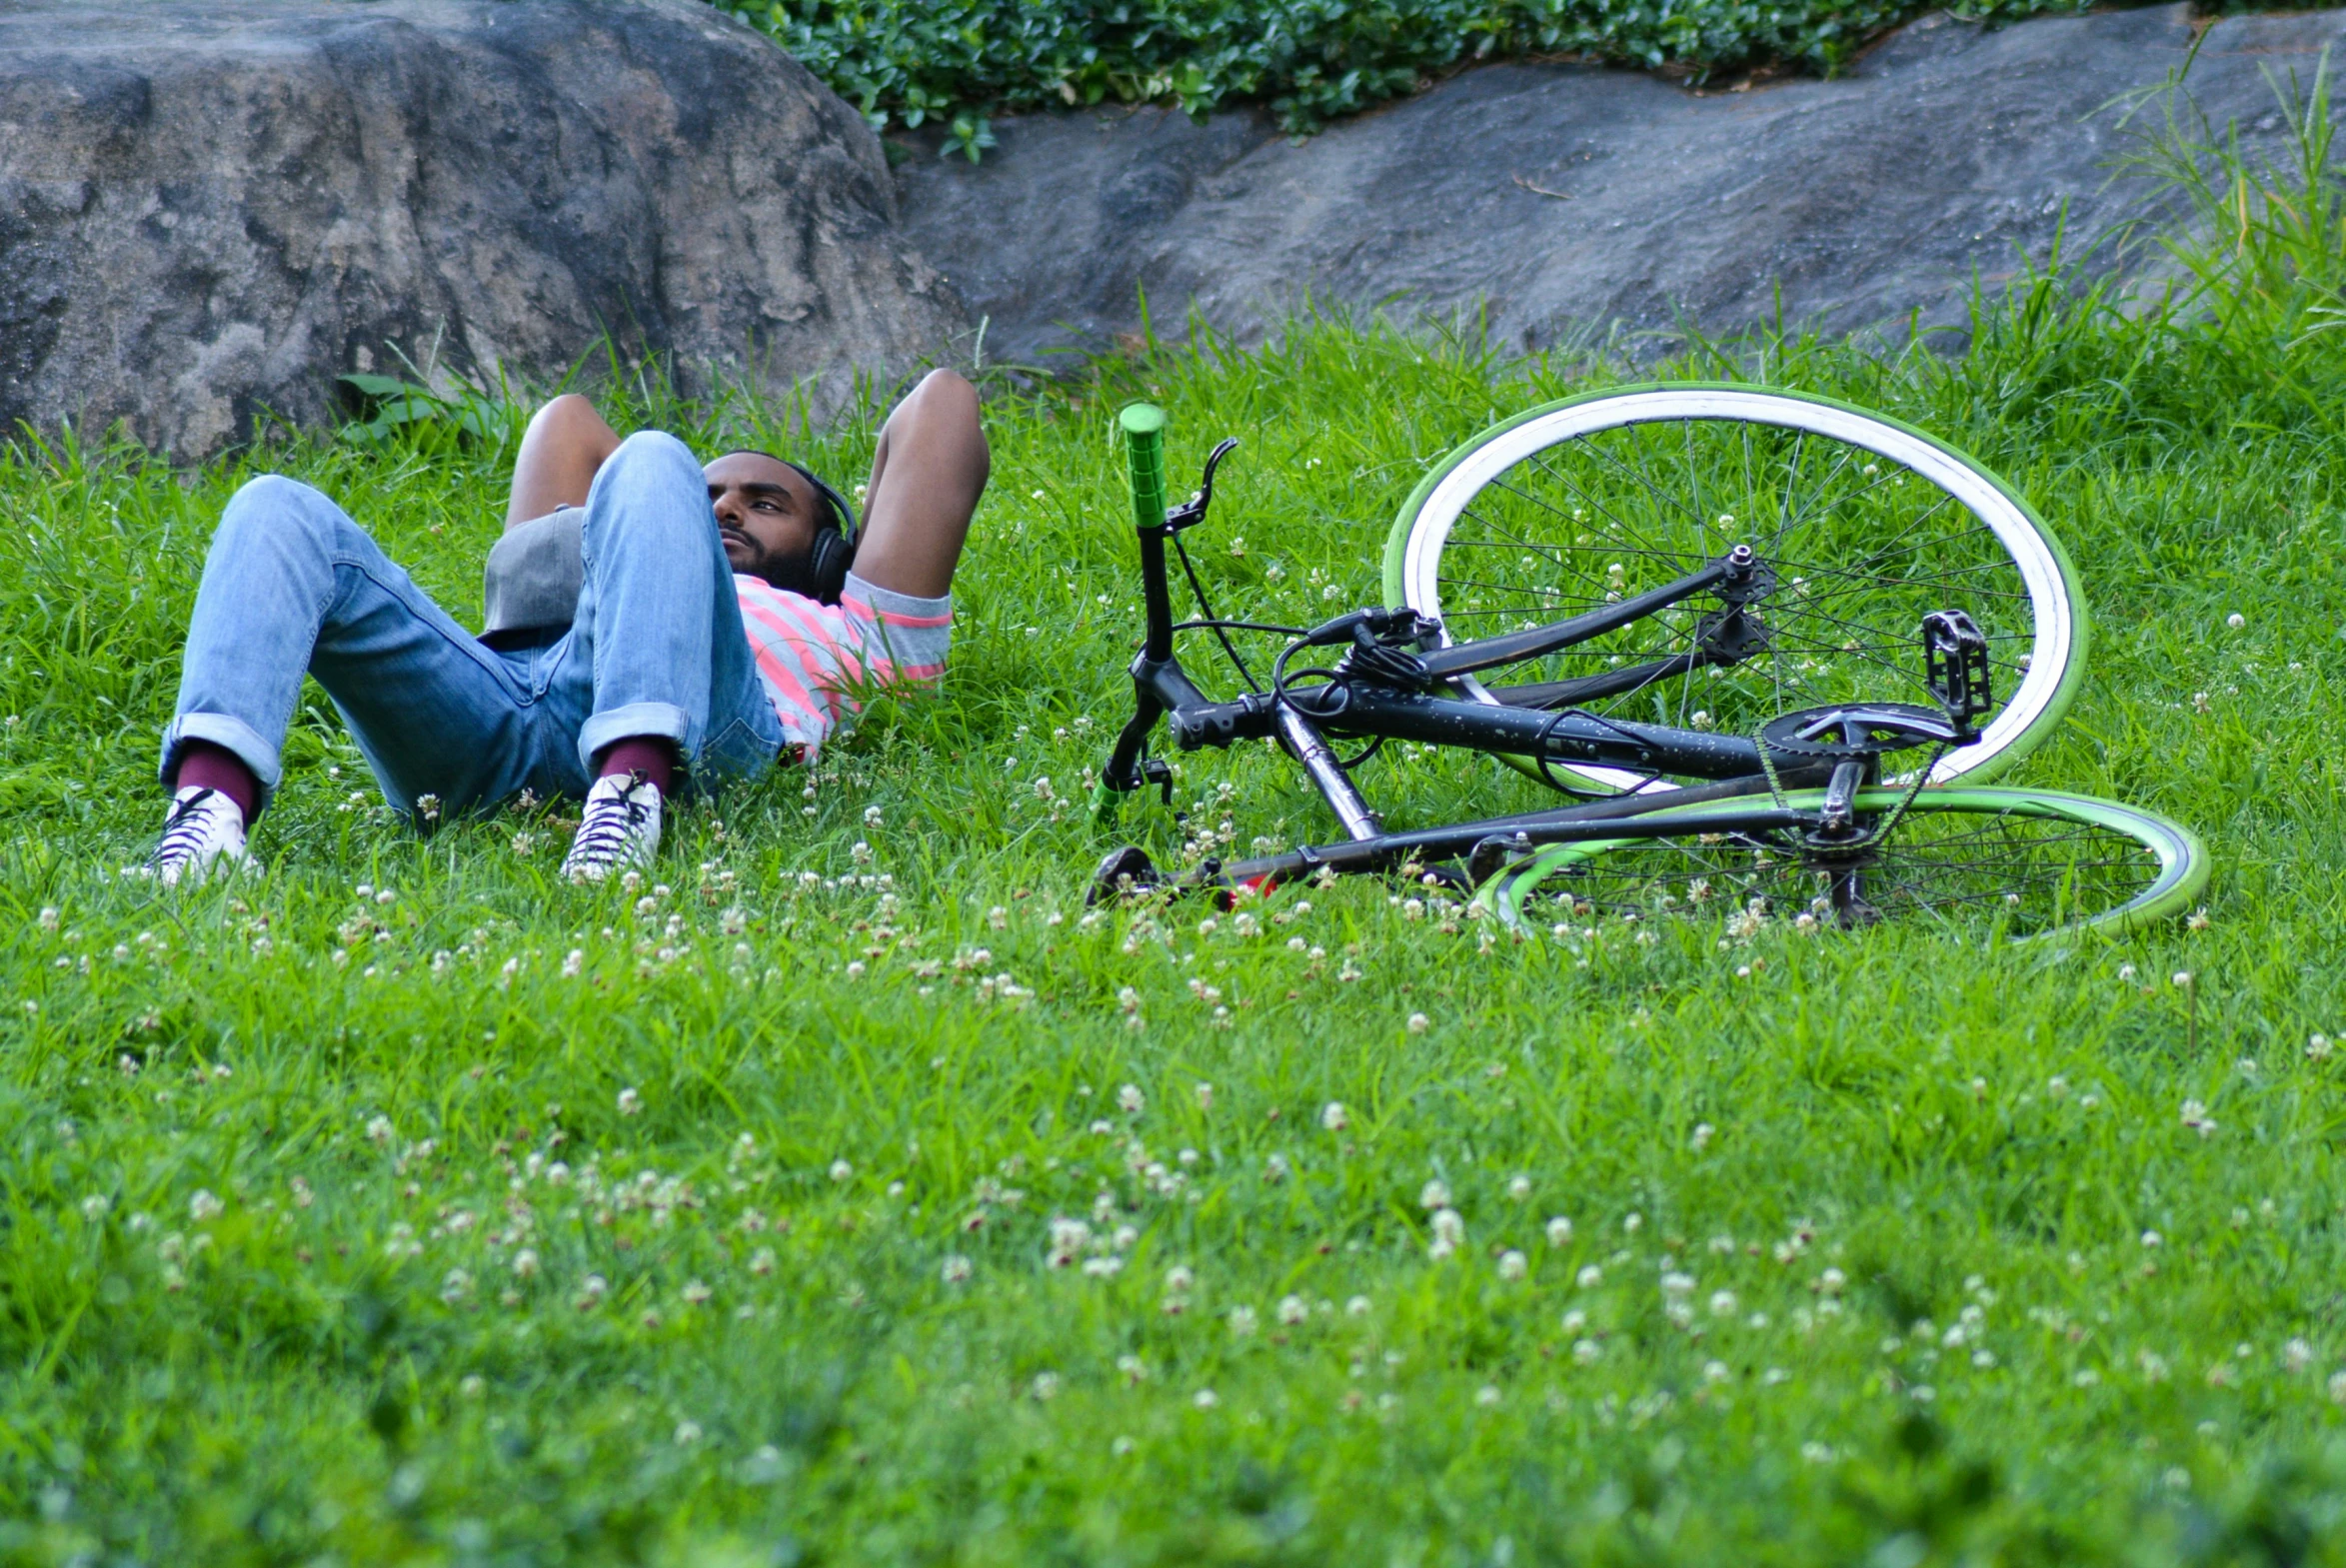 the boy is laying down in the grass next to the broken bike